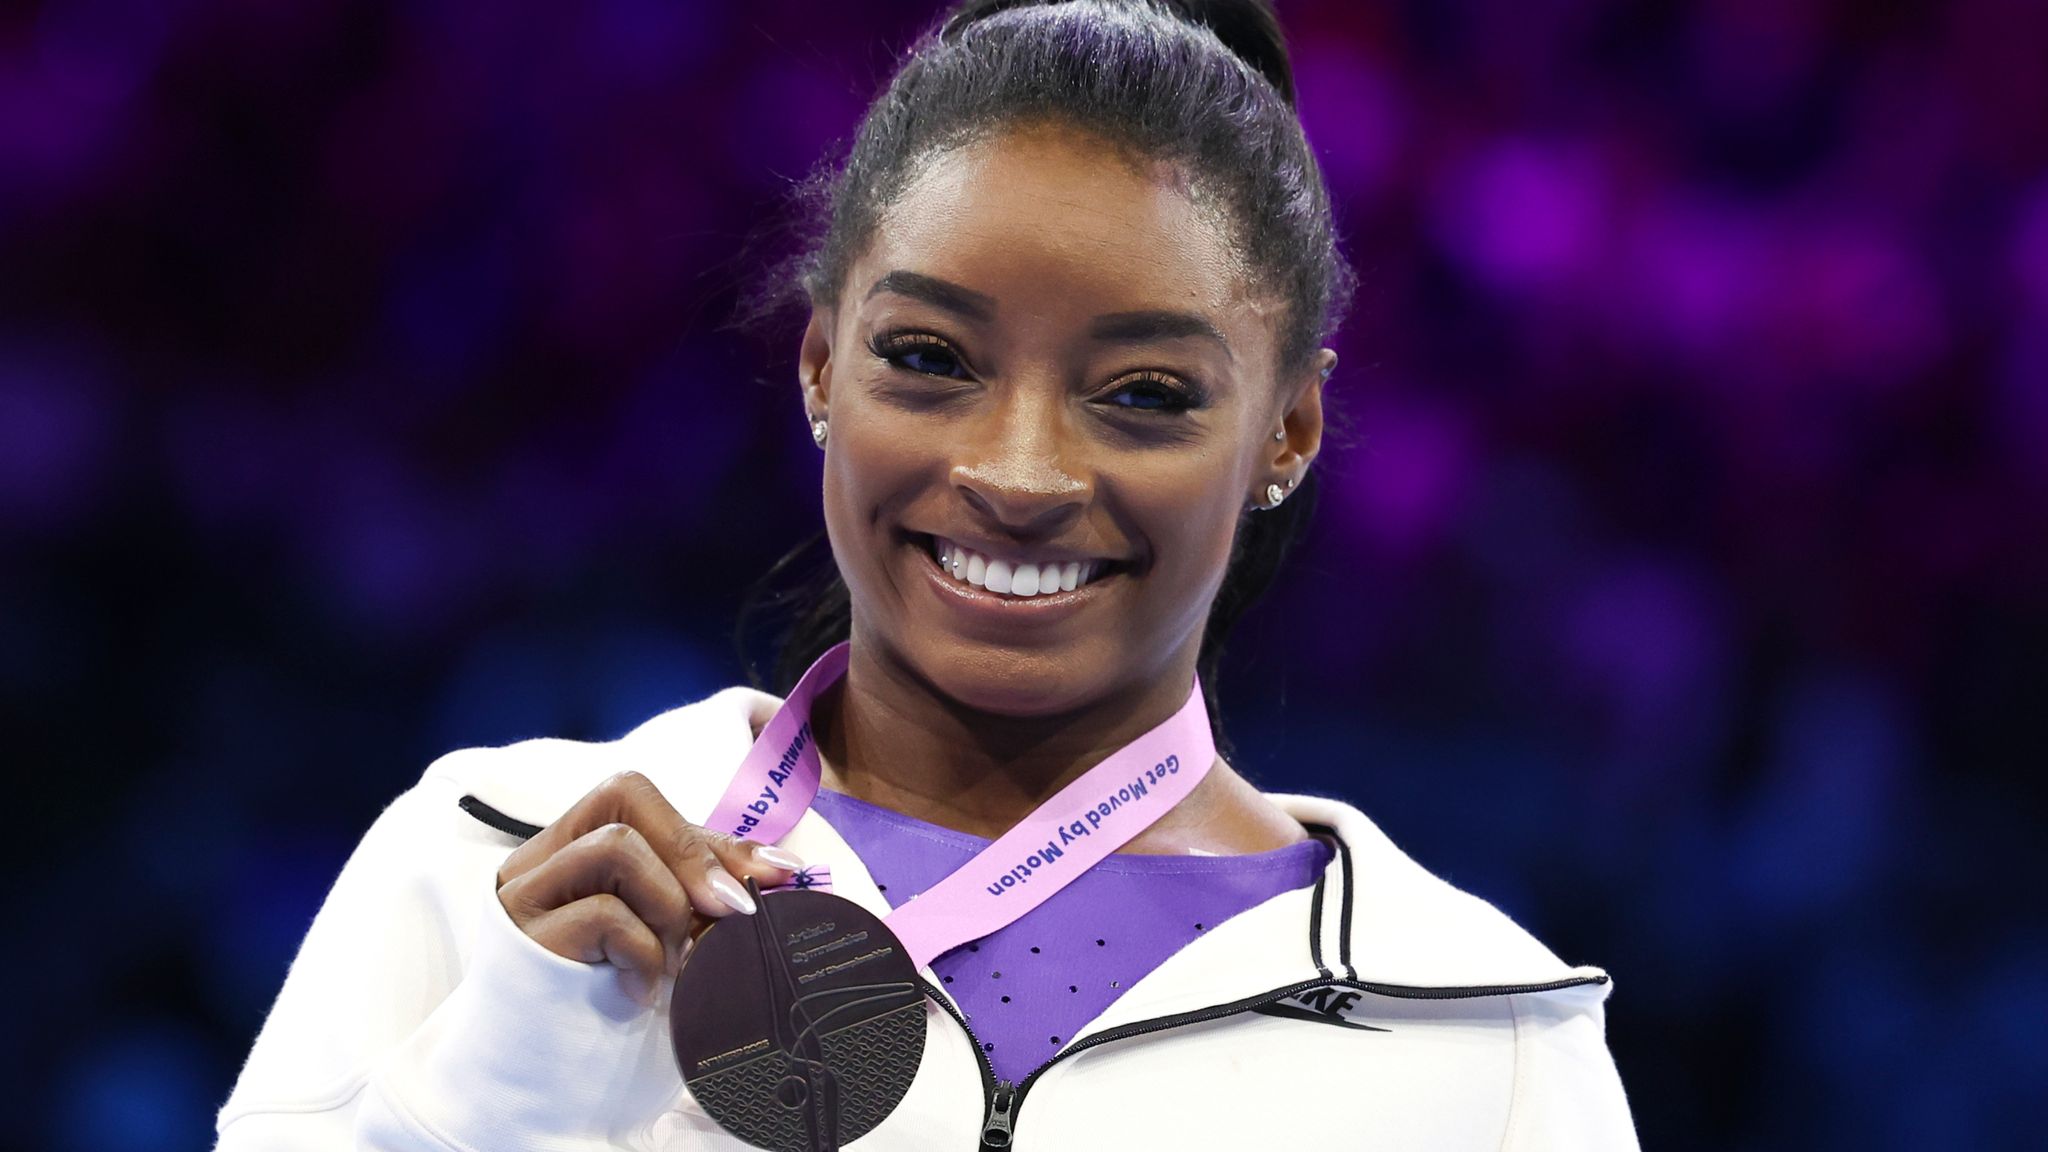 Simone Biles wins two more gold medals for USA at World Championships to  extend gymnastics record | Olympics News | Sky Sports